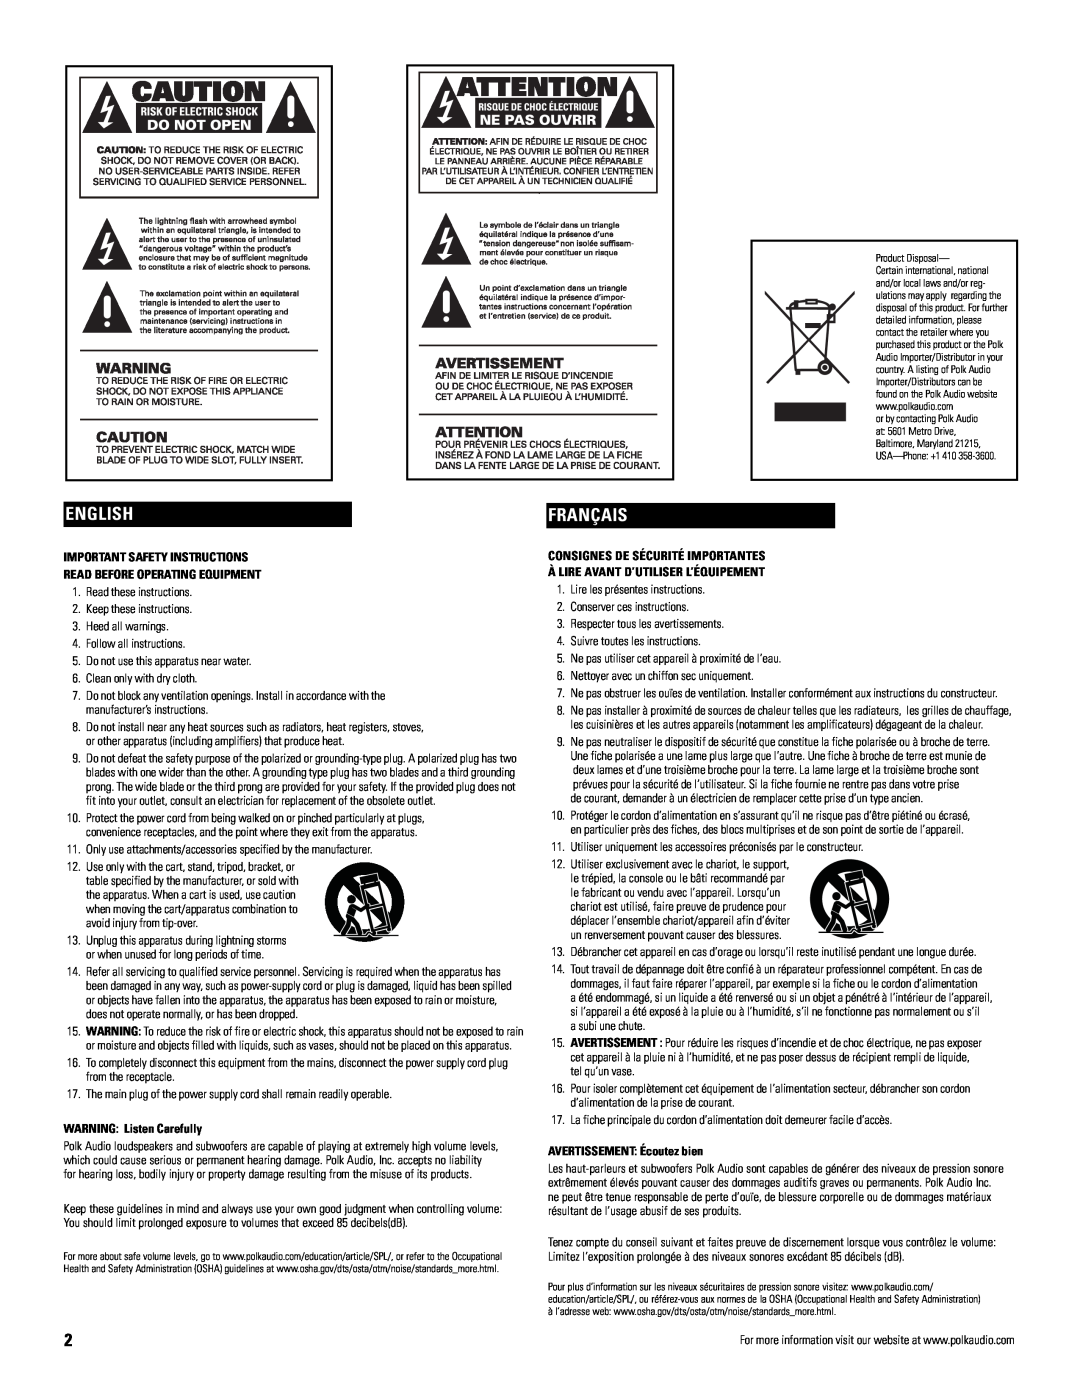 Polk Audio VM10 owner manual English, Français, Important Safety Instructions, Read Before Operating Equipment 